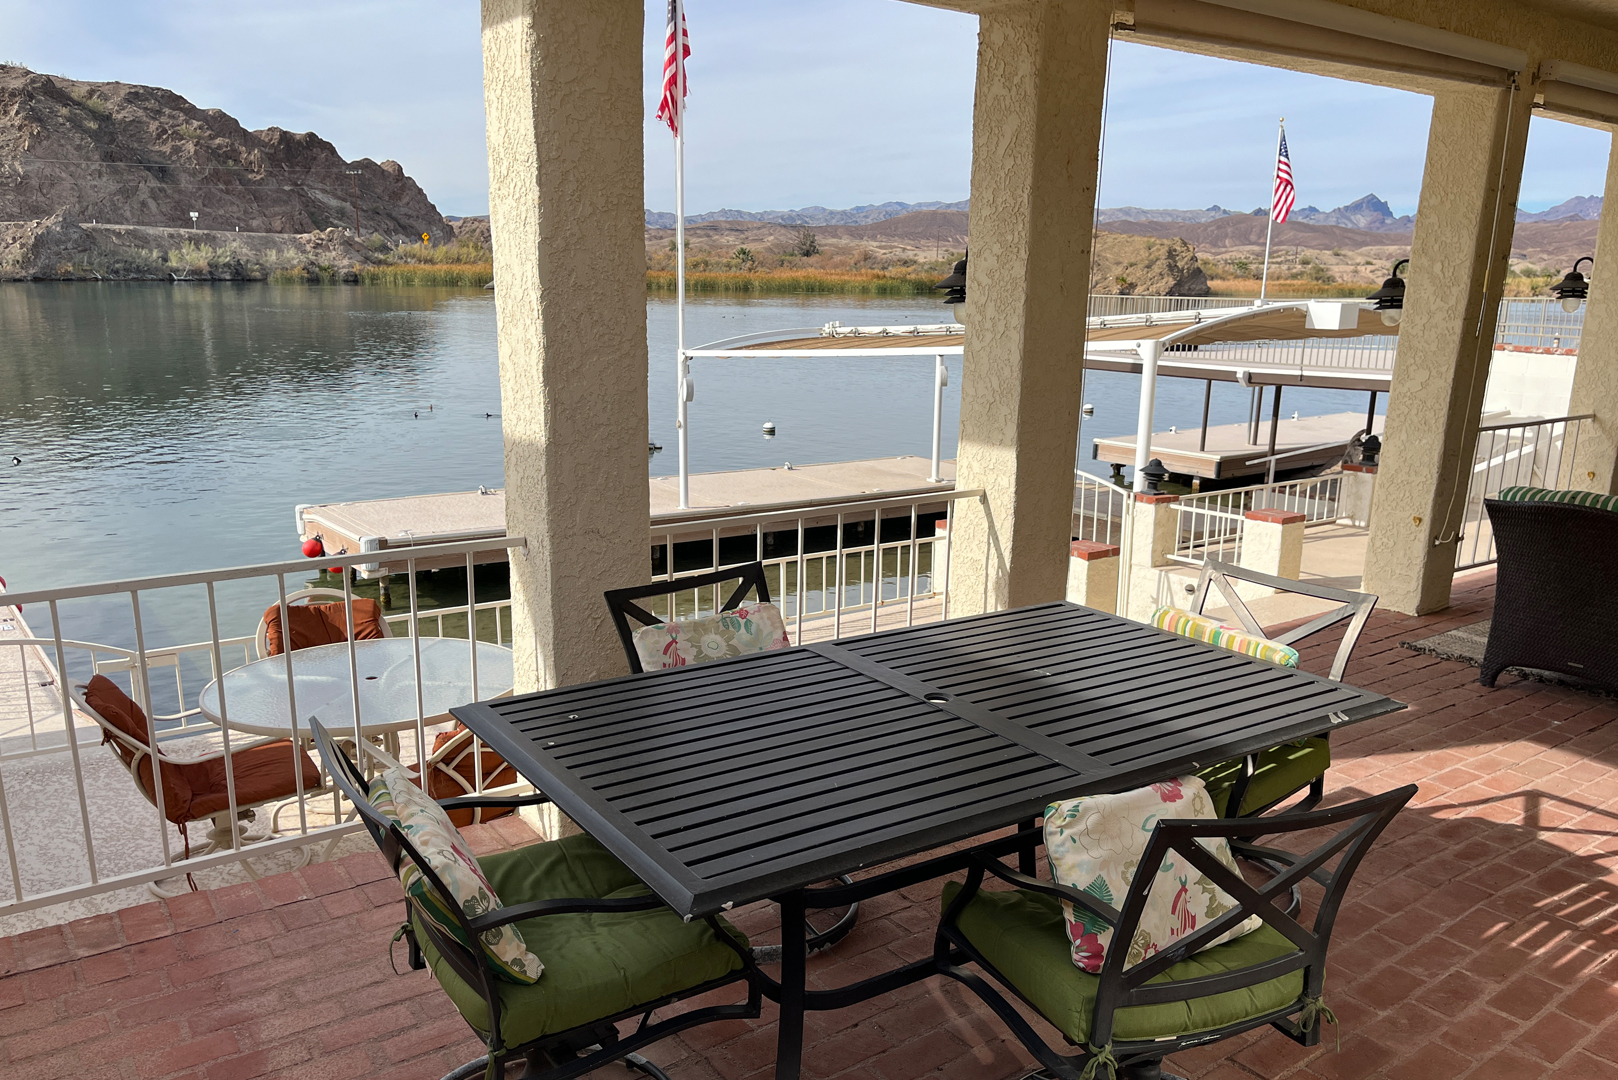 A view of the secondary dining area of the river lanai